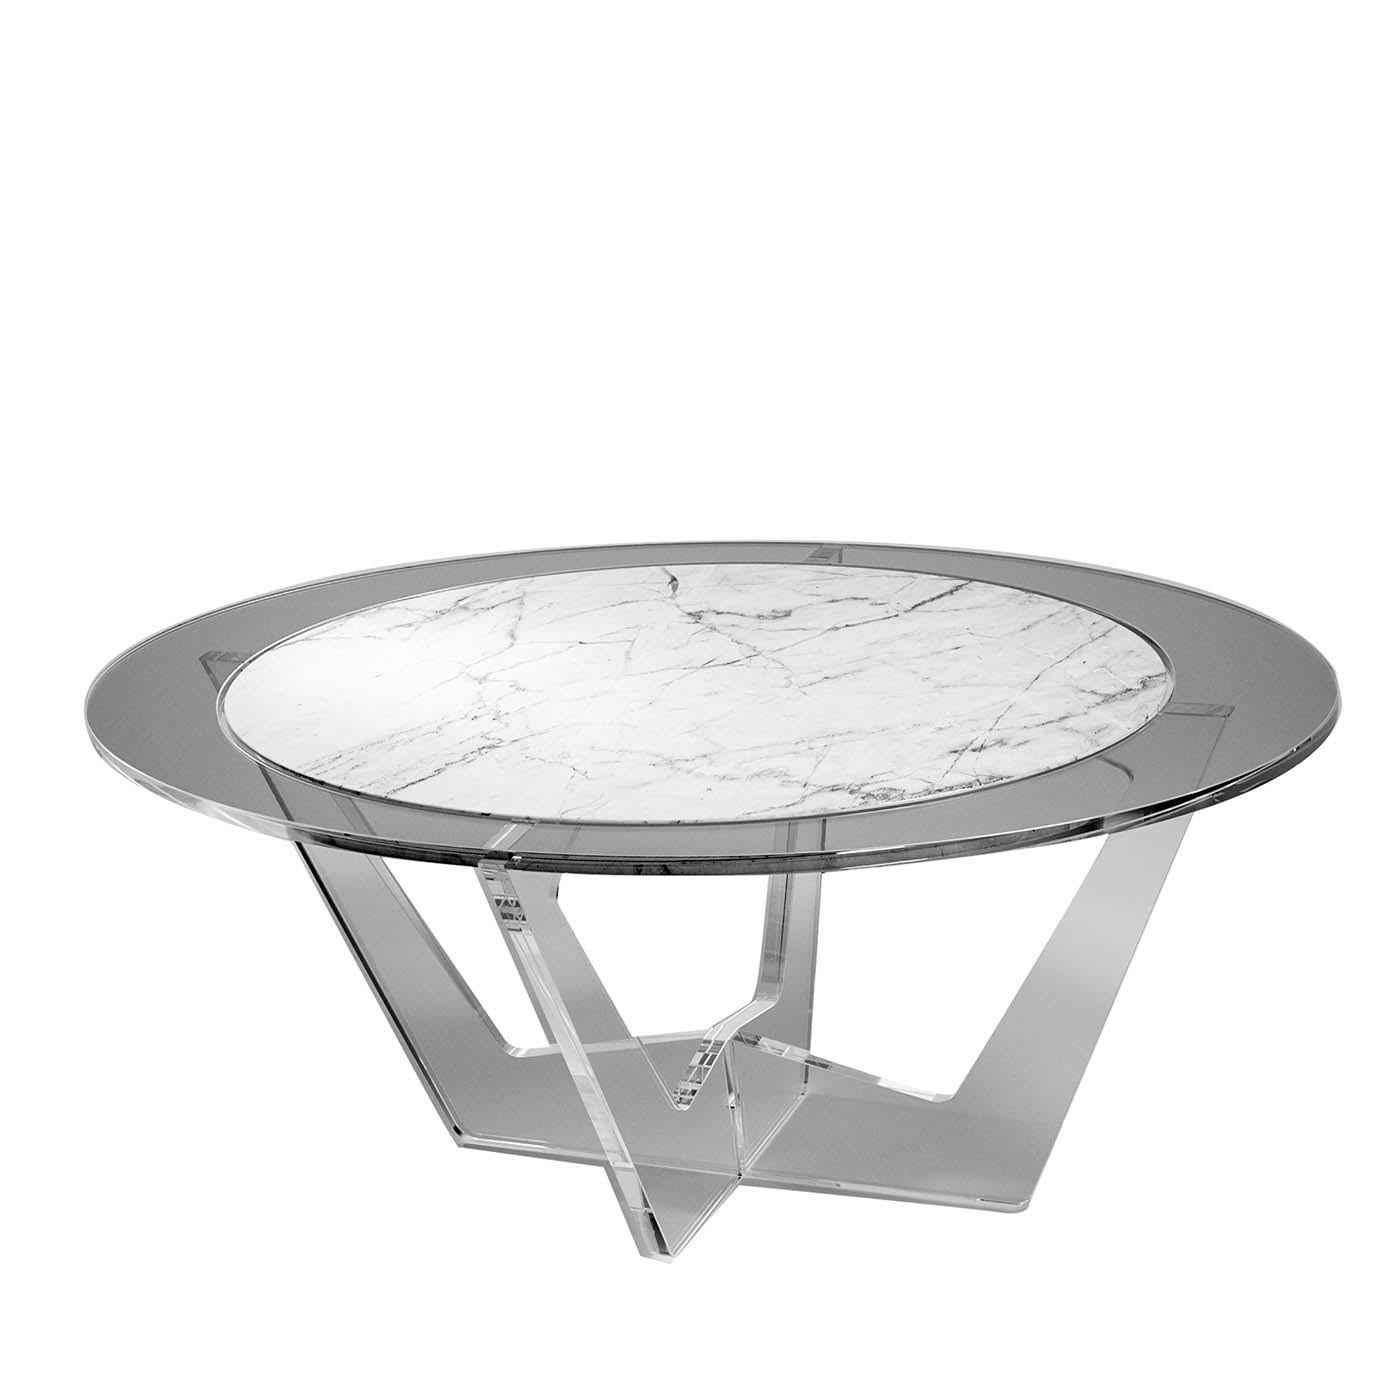 Italian Hac Gray Oval Coffee Table with White Carrara Marble Top by Madea Milano